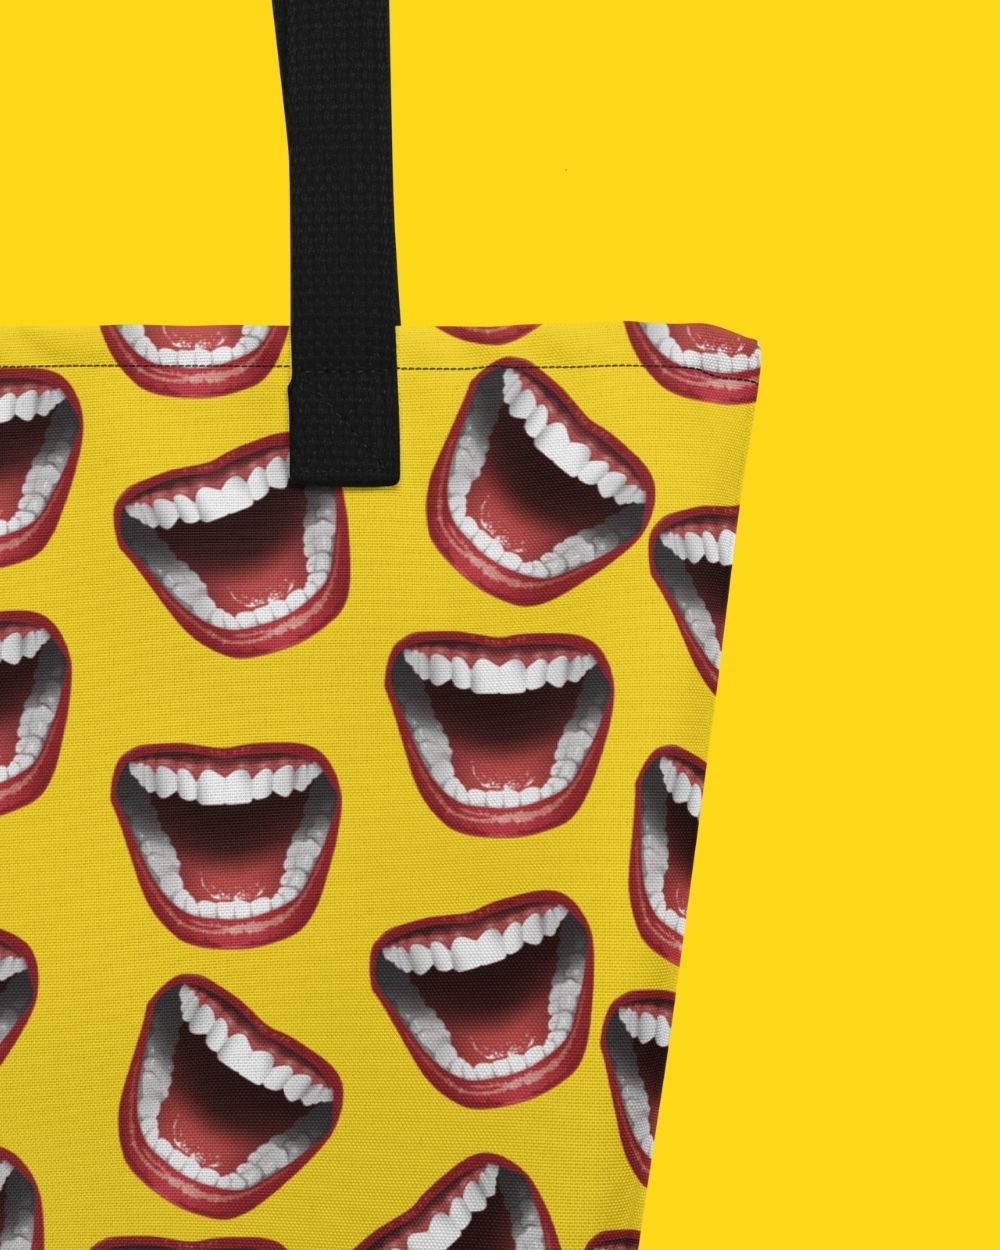 Our bag design "Salve & Ciao" has yellow as its main colour. Dozens of smiling mouths are printed on both sides. On one side it says Salve, on the other side it says Ciao. 